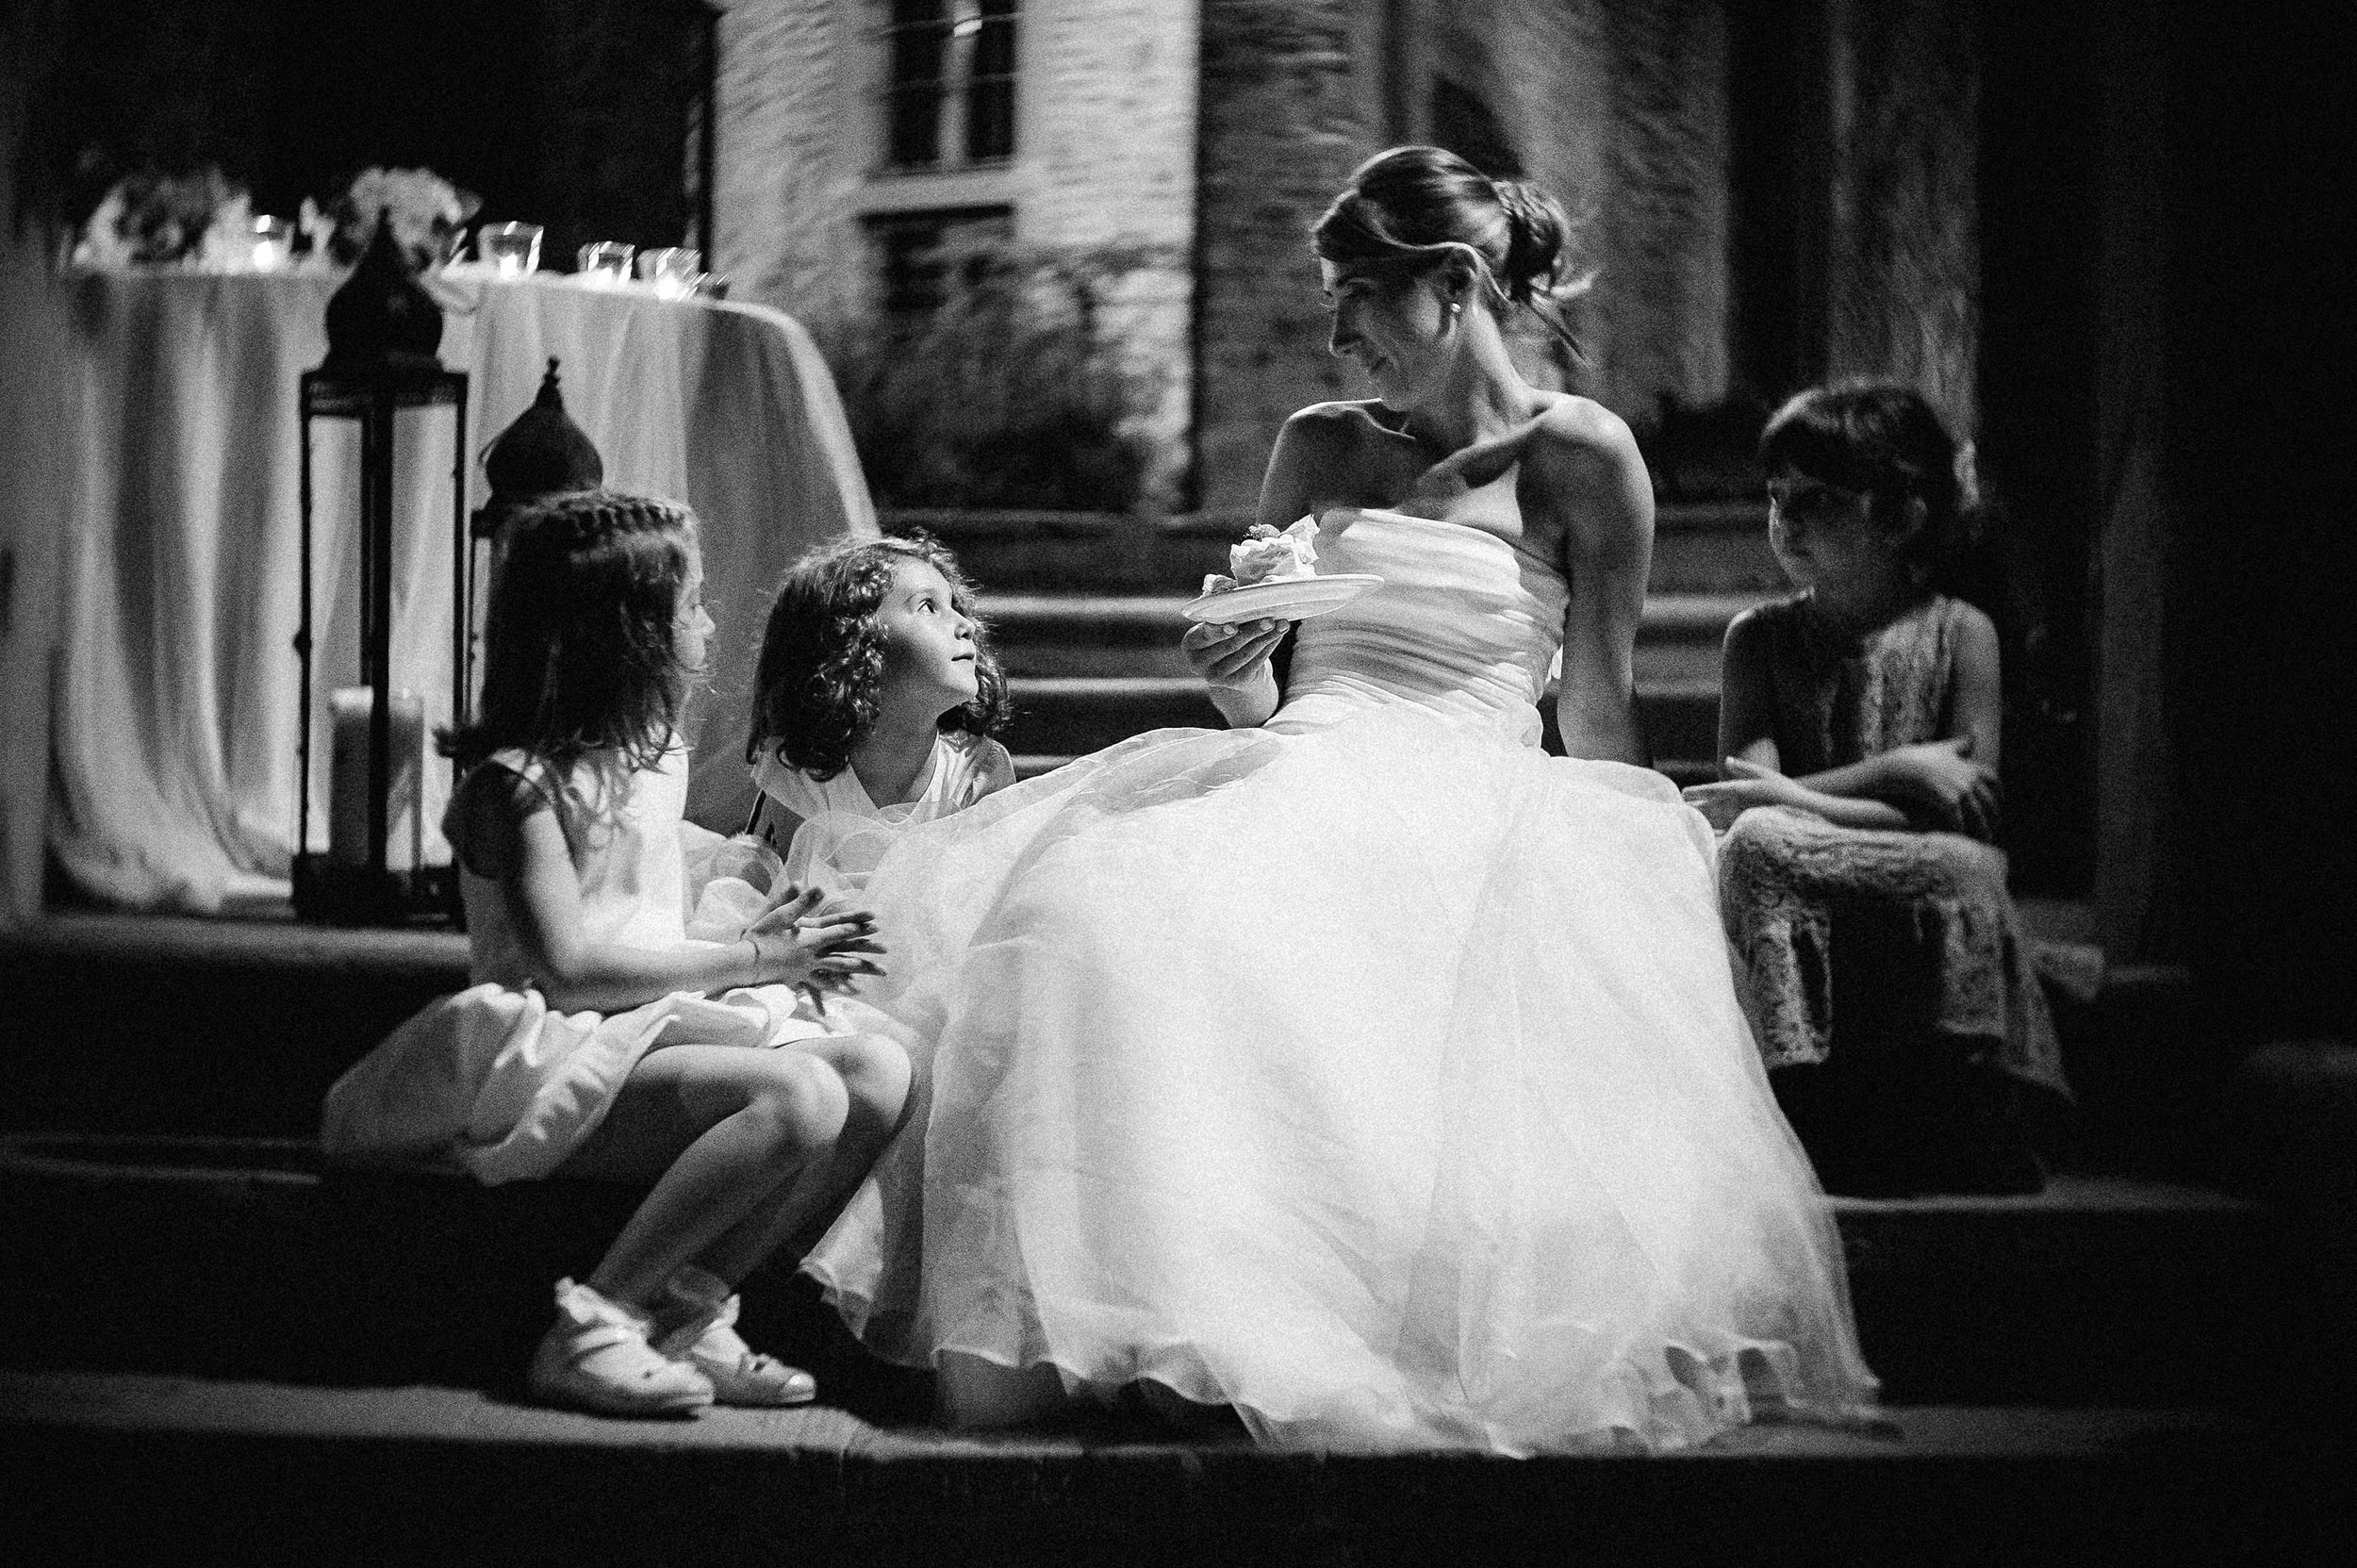 girls-around-the-bride-relaxed-moment-eating-cake-black-and-white-wedding-photography.jpg